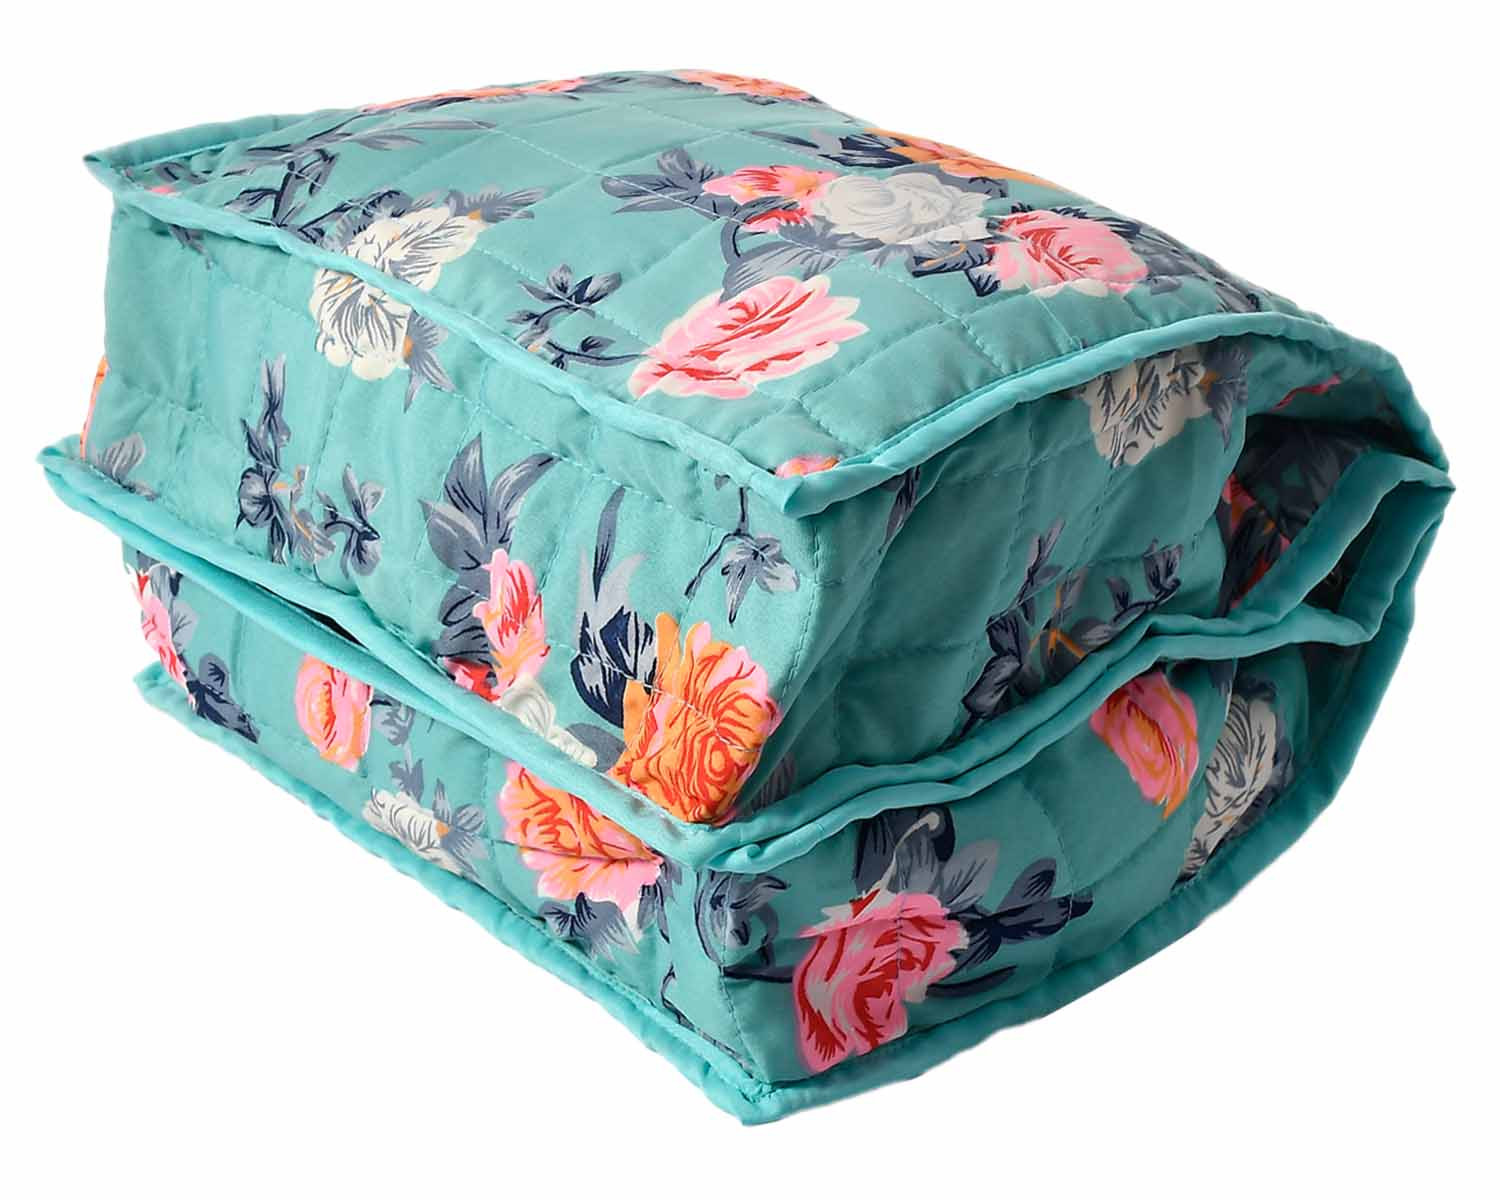 Kuber Industries Flower Printed Foldable Cotton Undergarments, Clothes Organizer/Storage Bag With 2 Tranasparent Compartment (Green)